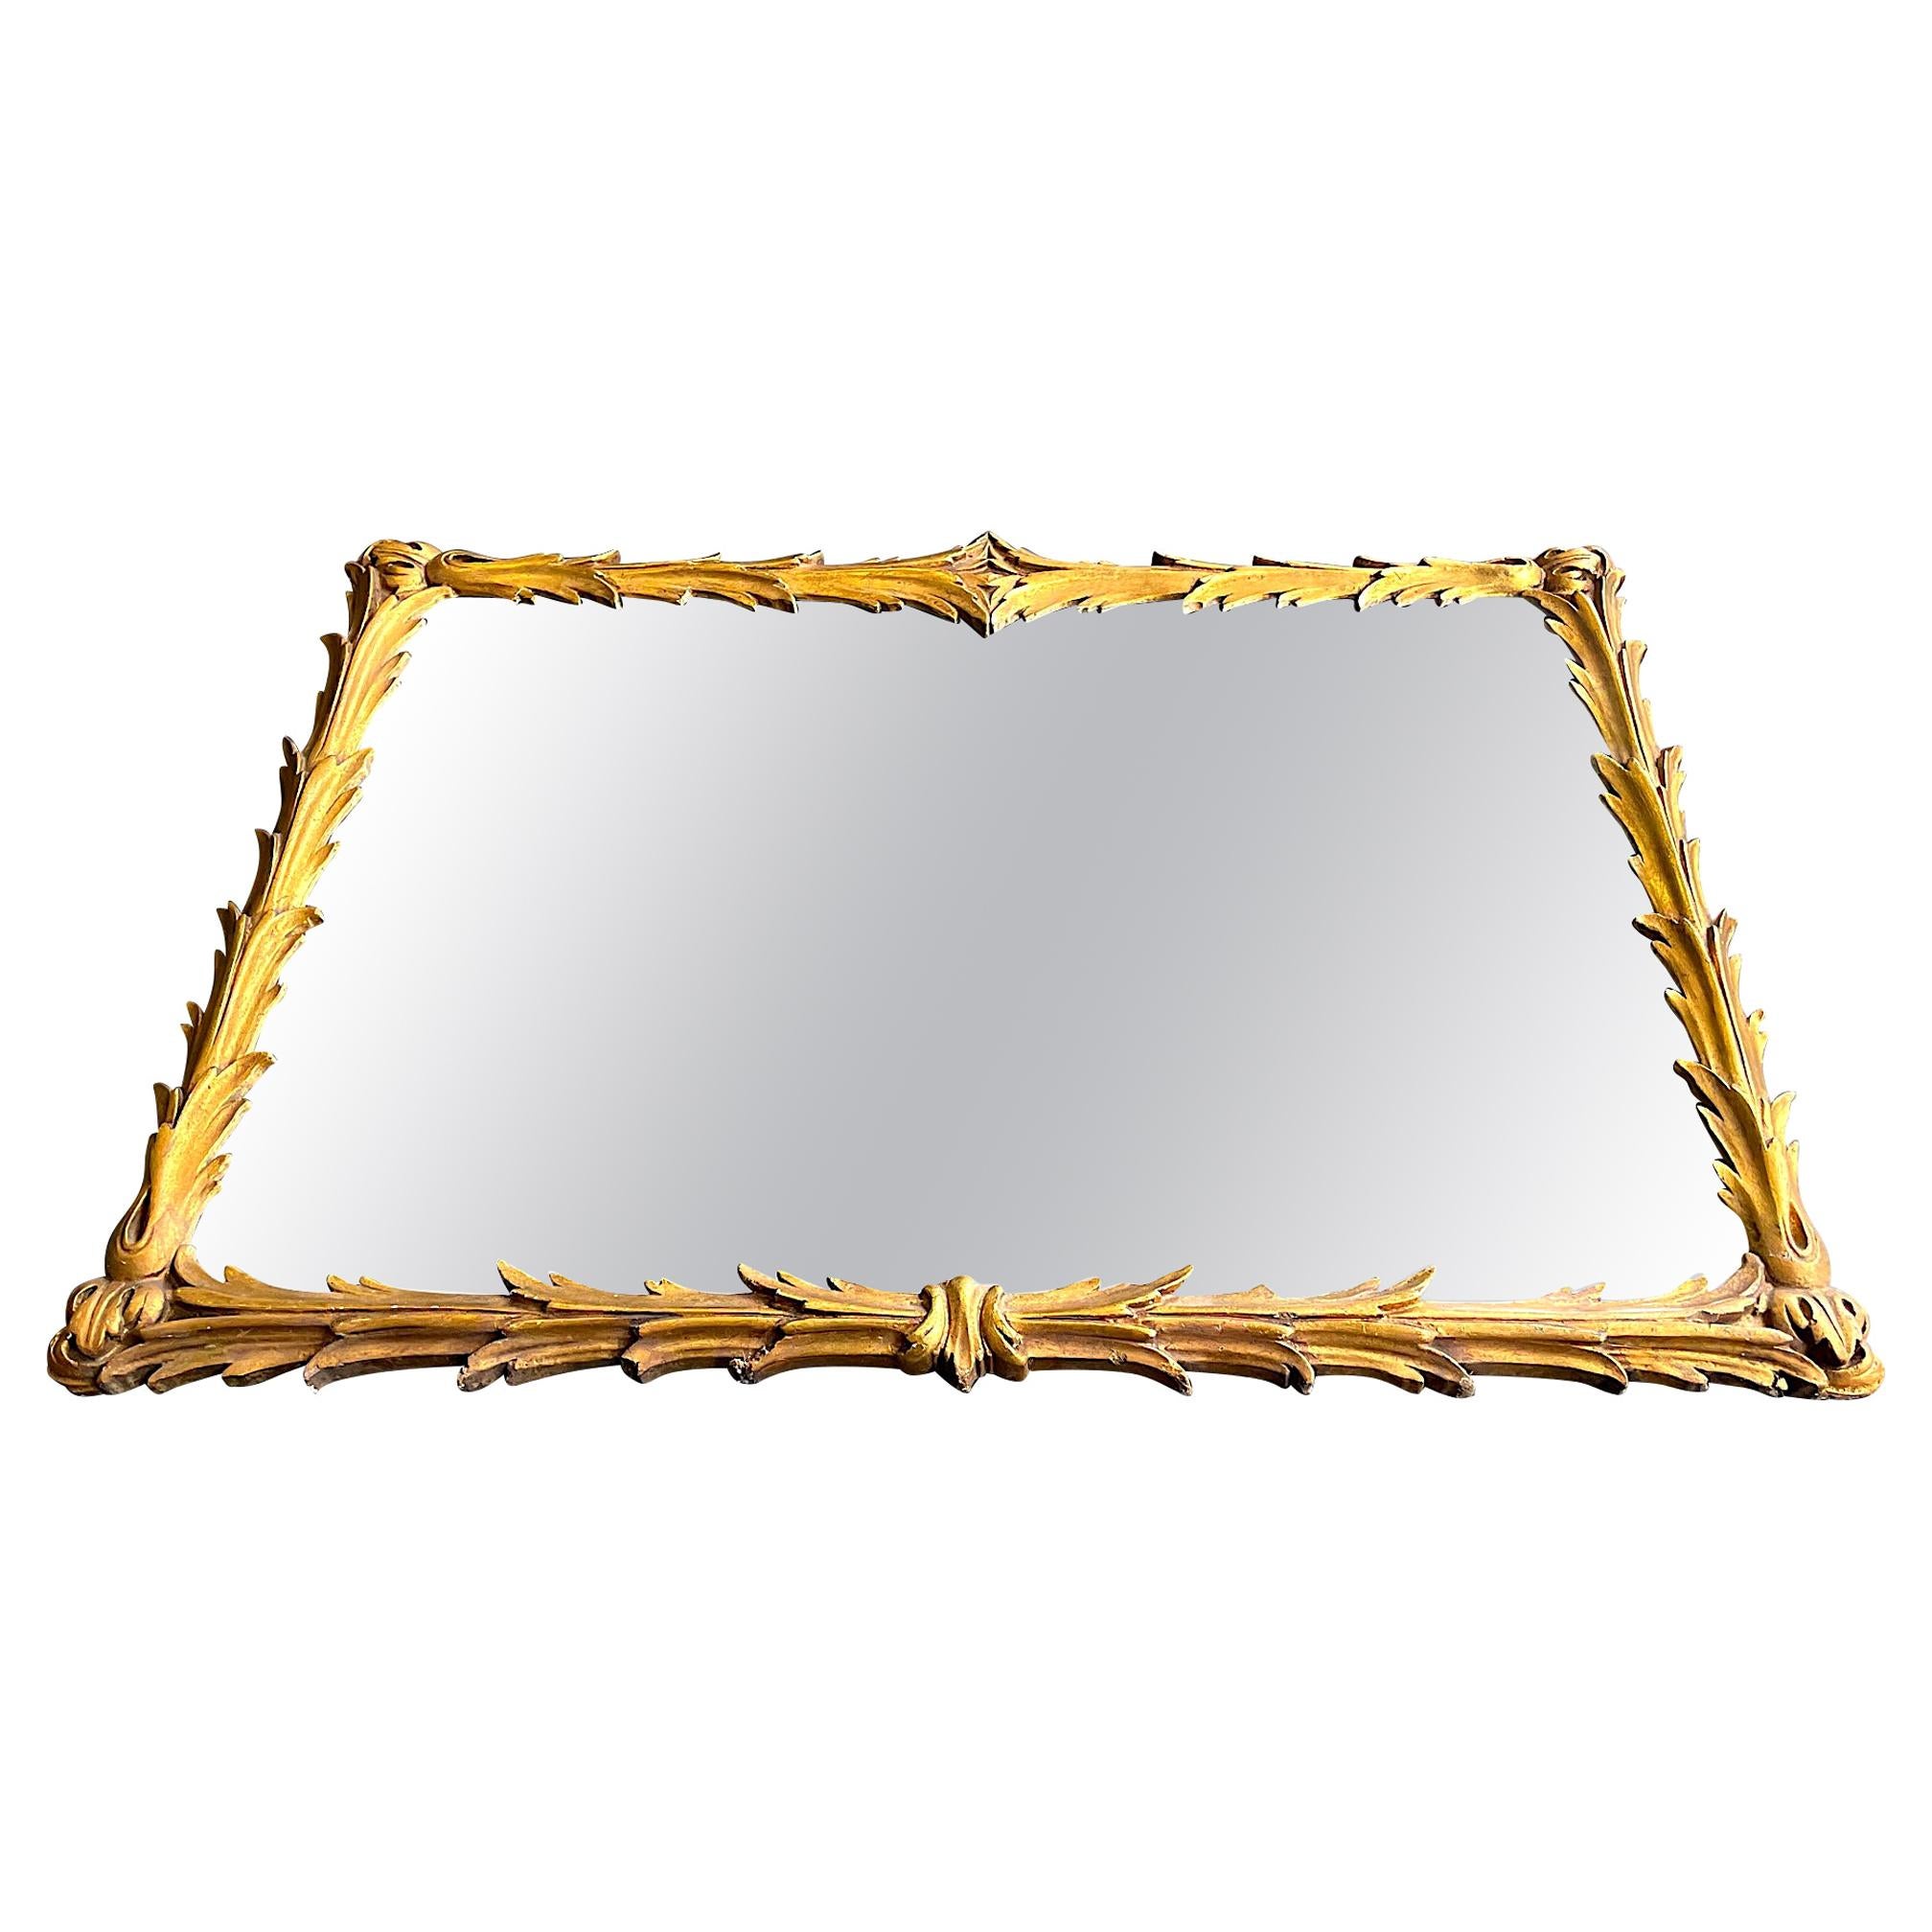 Lovely 1950s Italian Rectangular Rococo Style Gilt Gesso Acanthus Wall Mirror For Sale